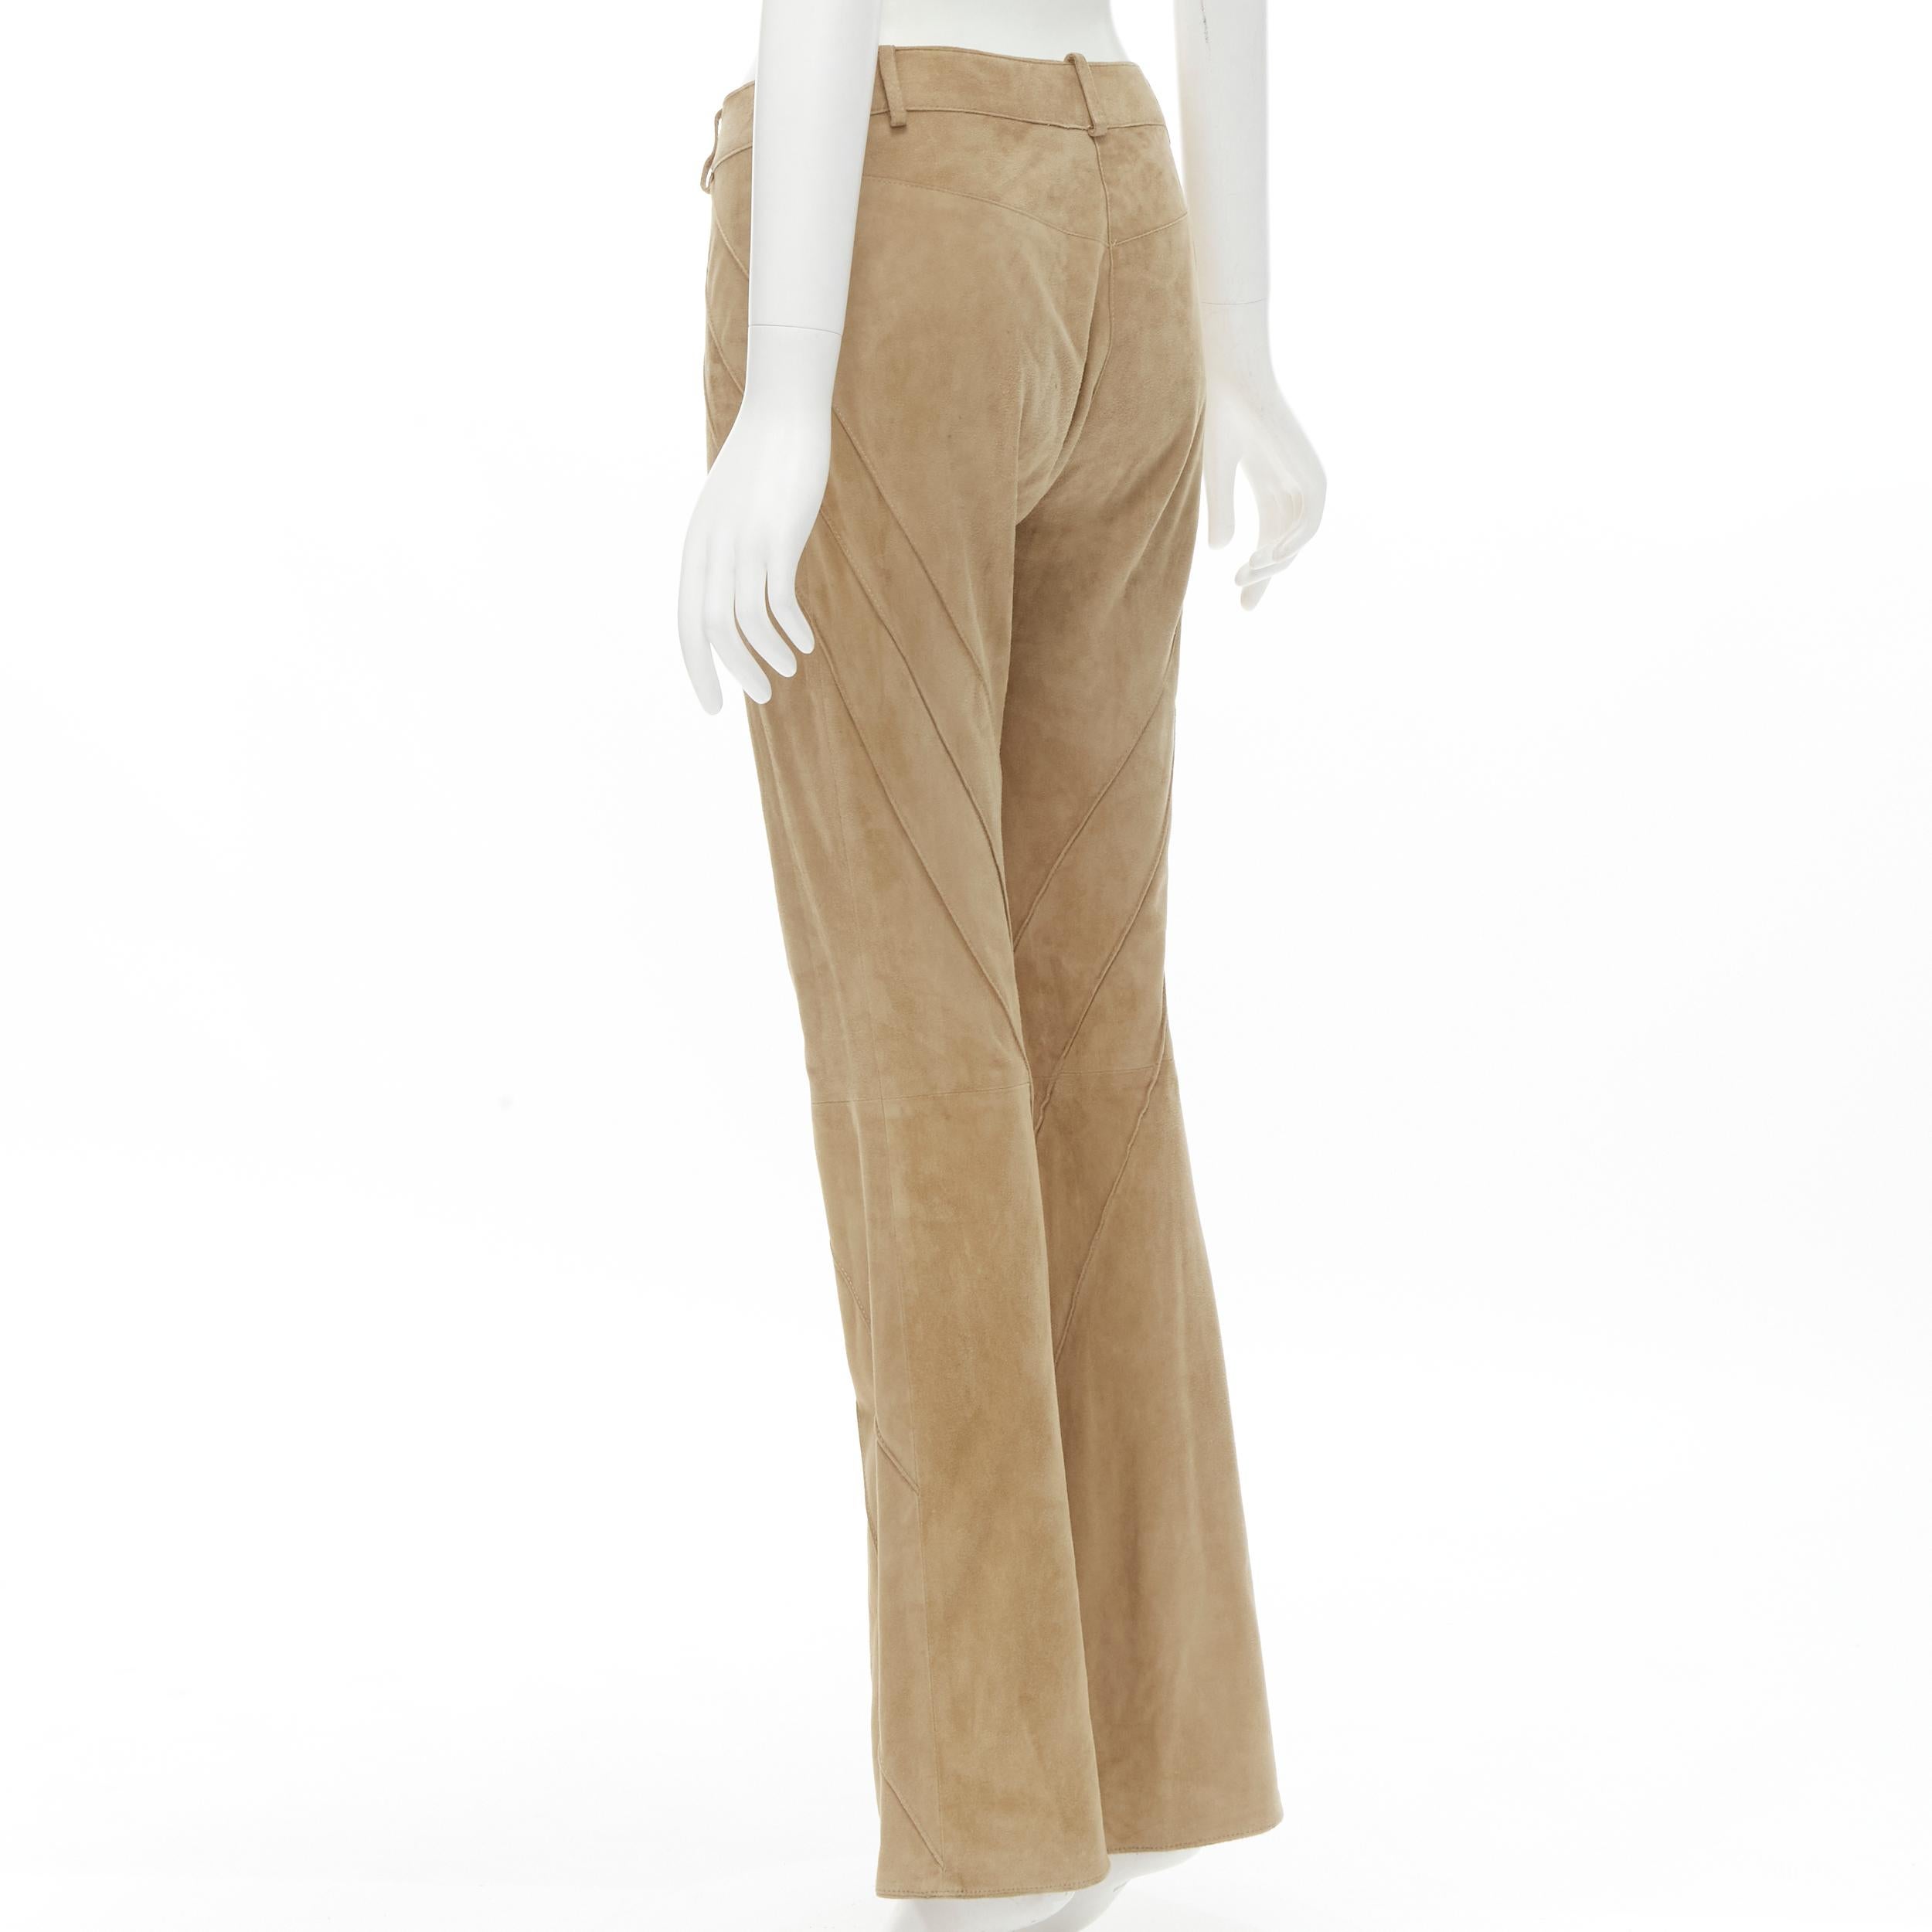 CHRISTIAN DIOR Galliano Vintage brown suede spiral dart flared pants FR36 S 1